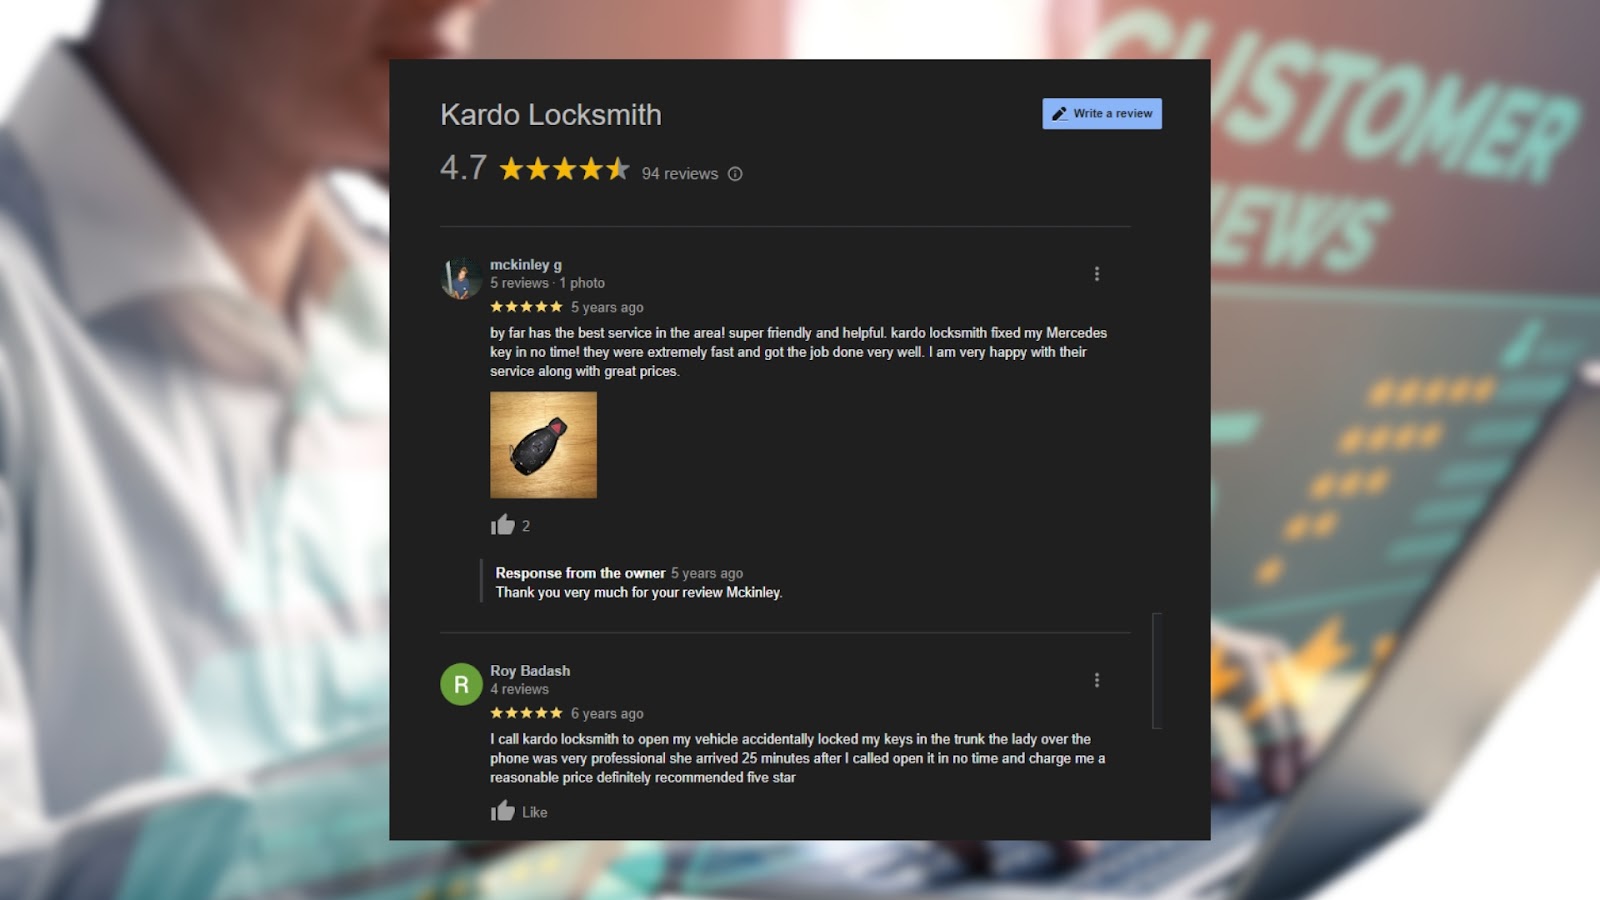 Reviews of a reliable locksmith service provider